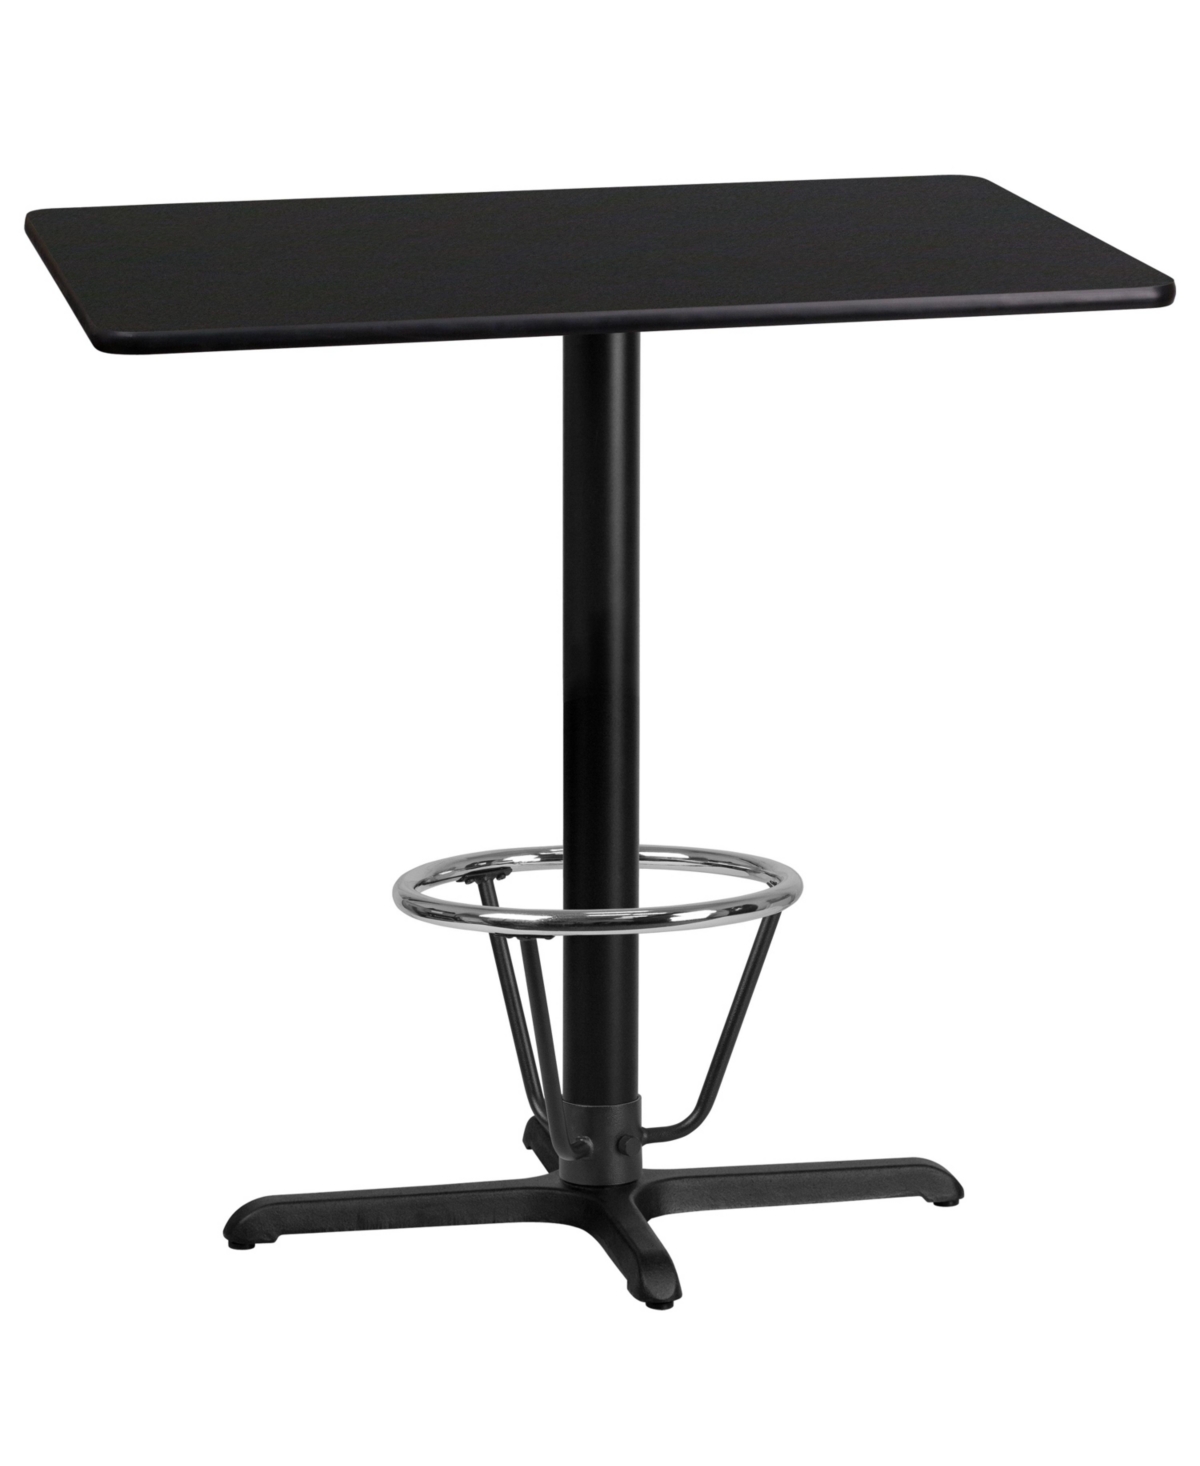 Emma+oliver 24"x42" Rectangular Laminate Bar Table With 23.5"x29.5" Foot Ring Base In Black